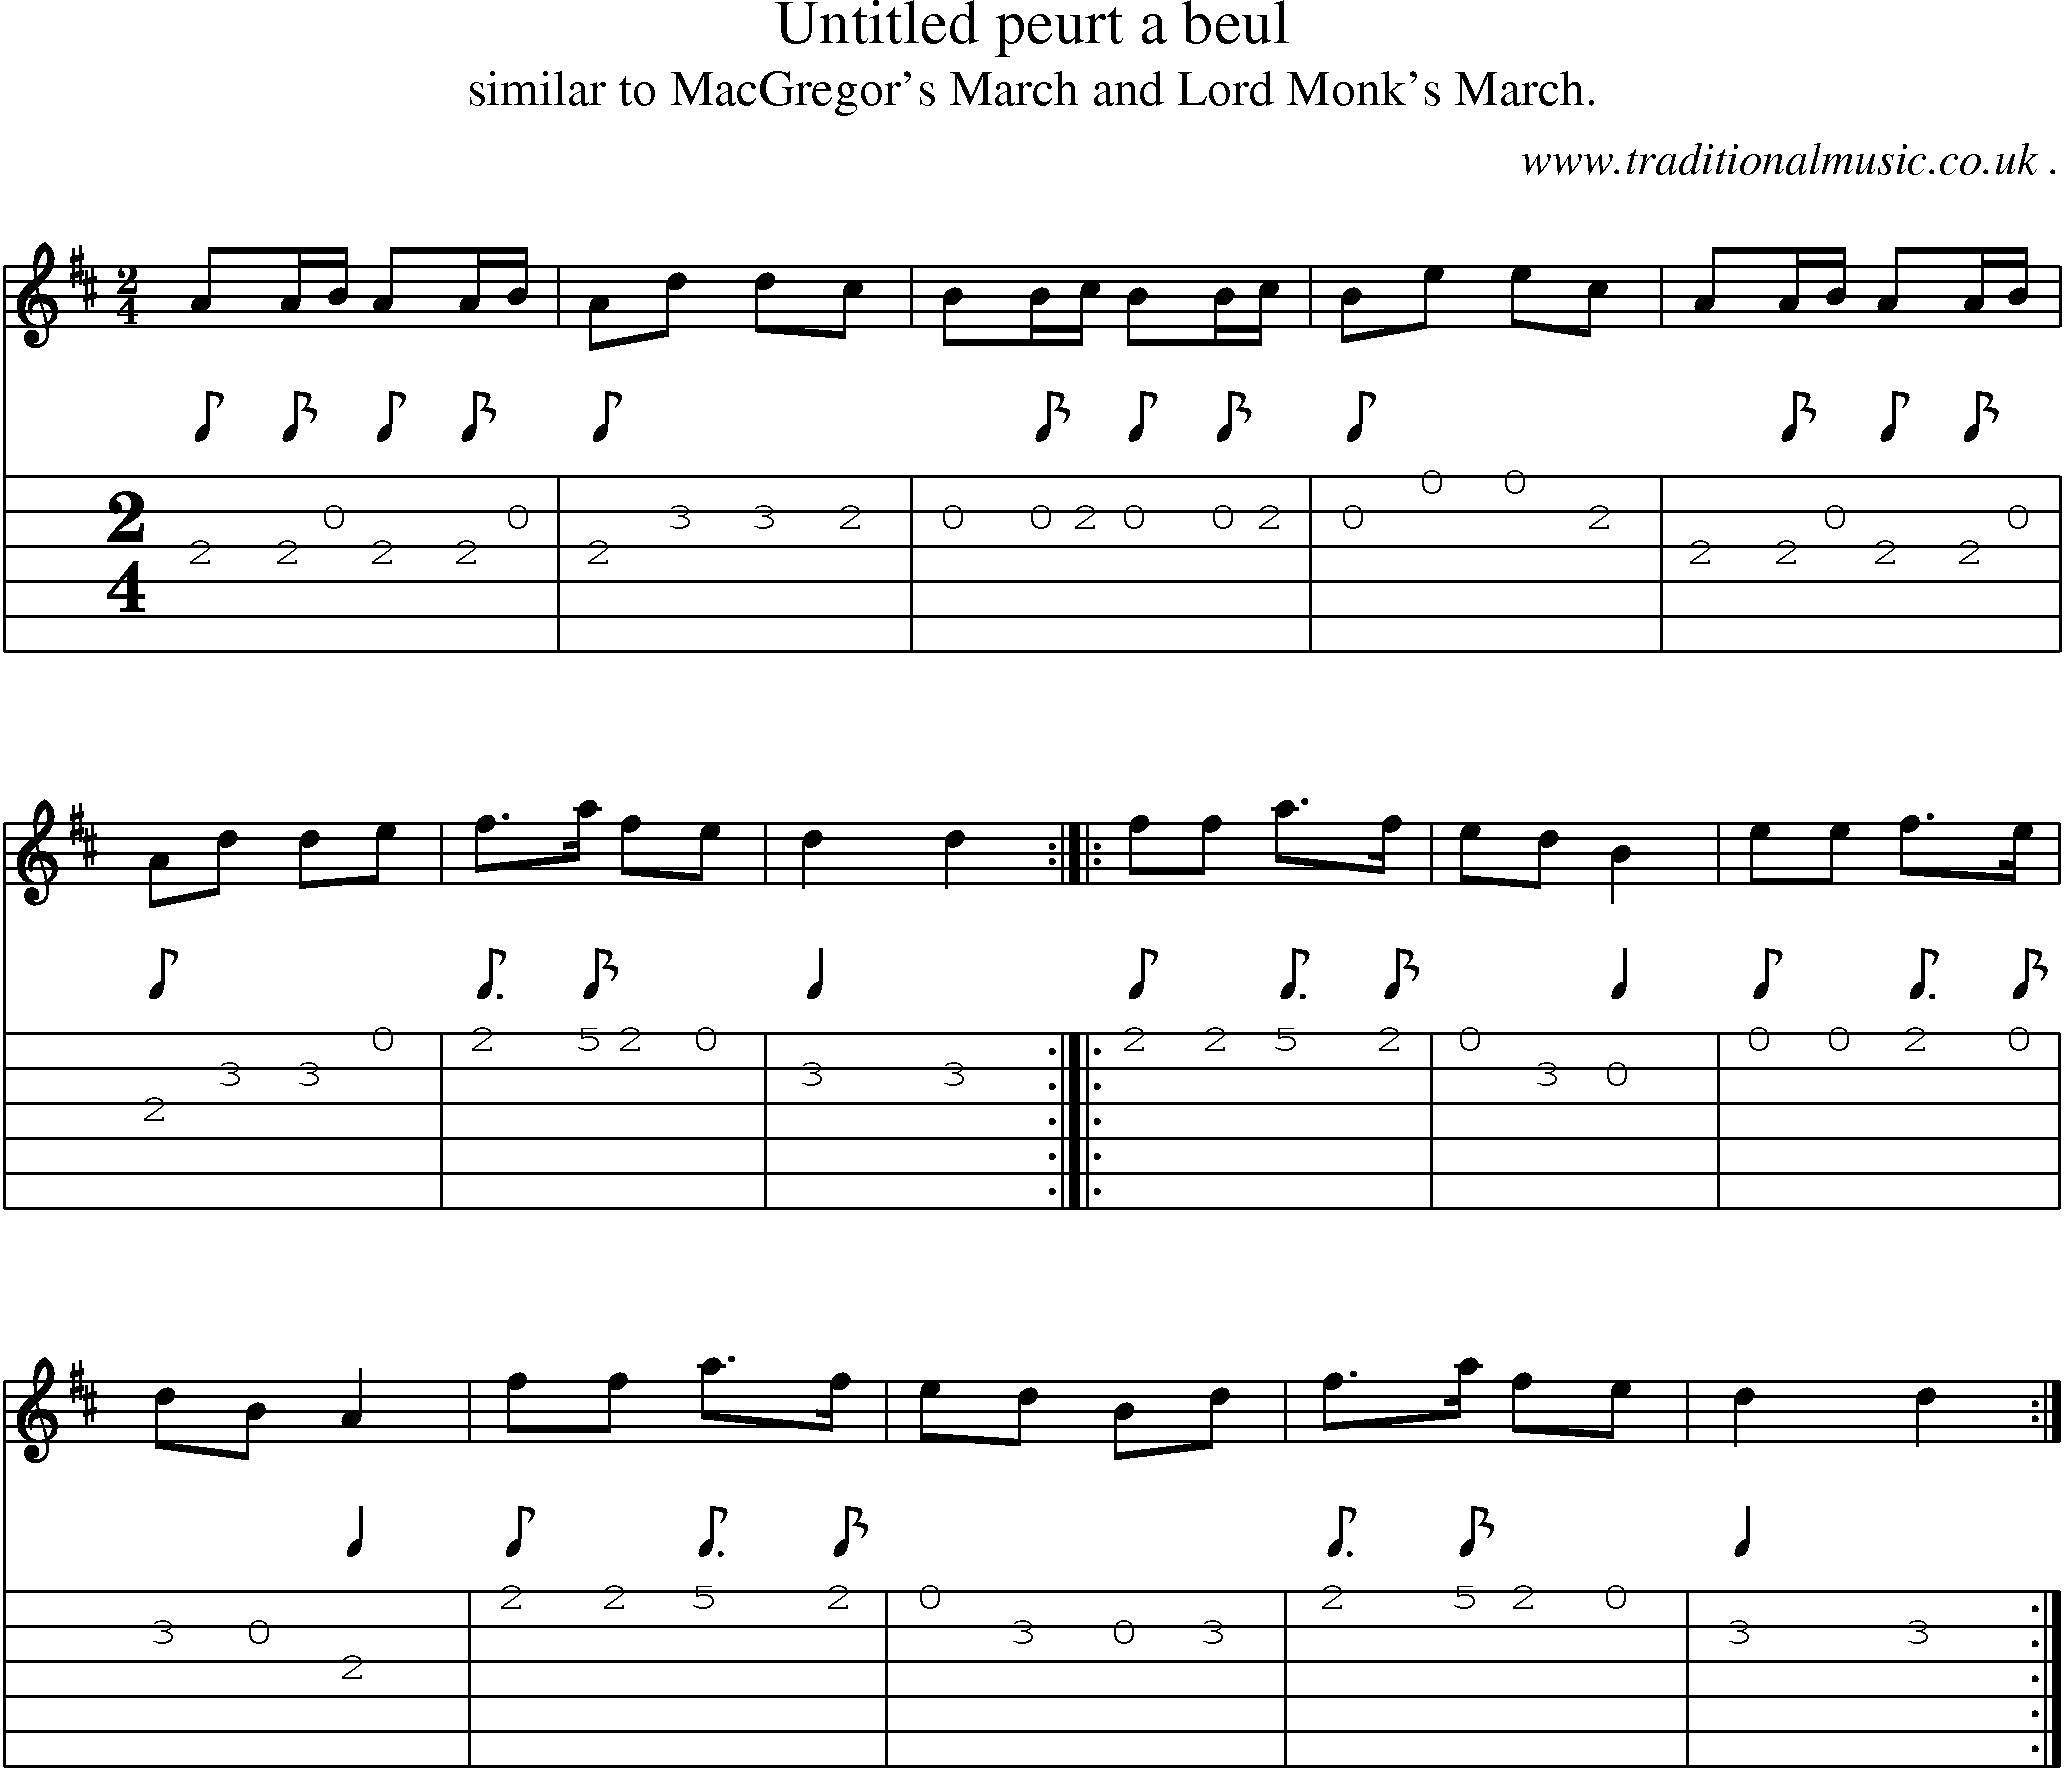 Sheet-music  score, Chords and Guitar Tabs for Untitled Peurt A Beul